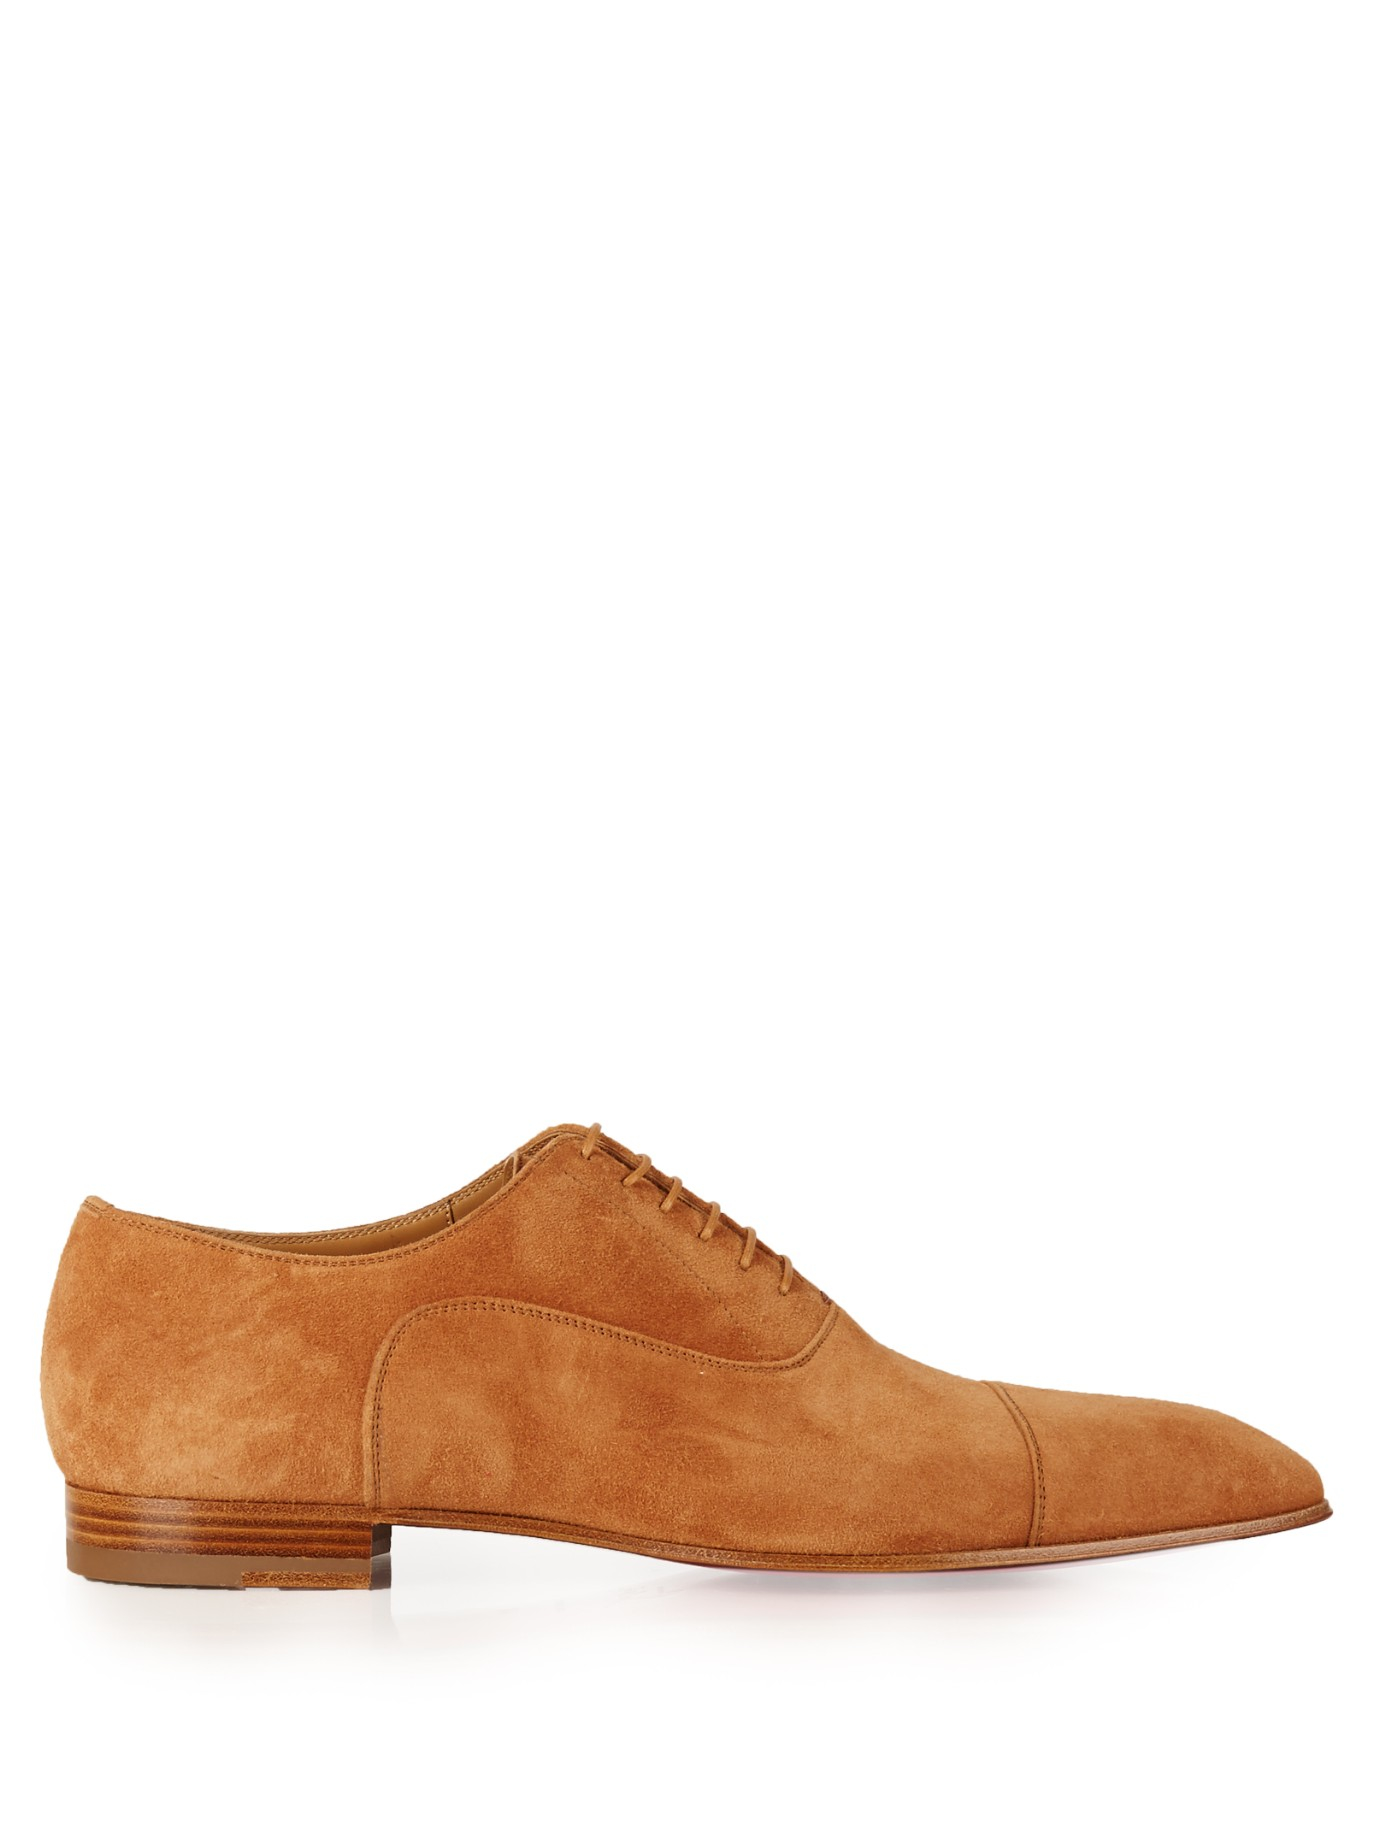 Lyst - Christian Louboutin Greggo Suede Oxford Shoes in Brown for Men